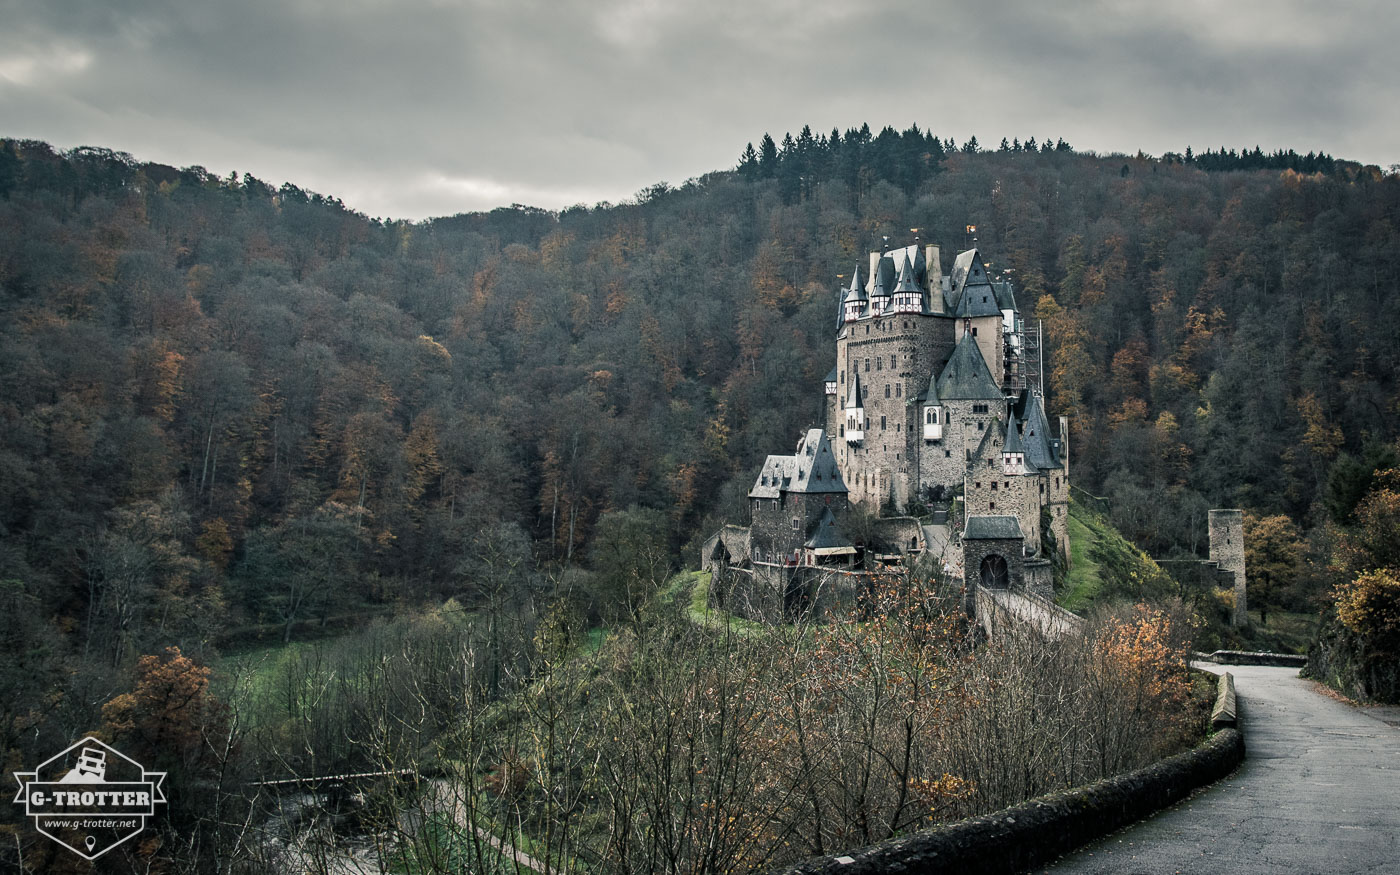 The Eltz castle looks like straight out of a fairytale. 